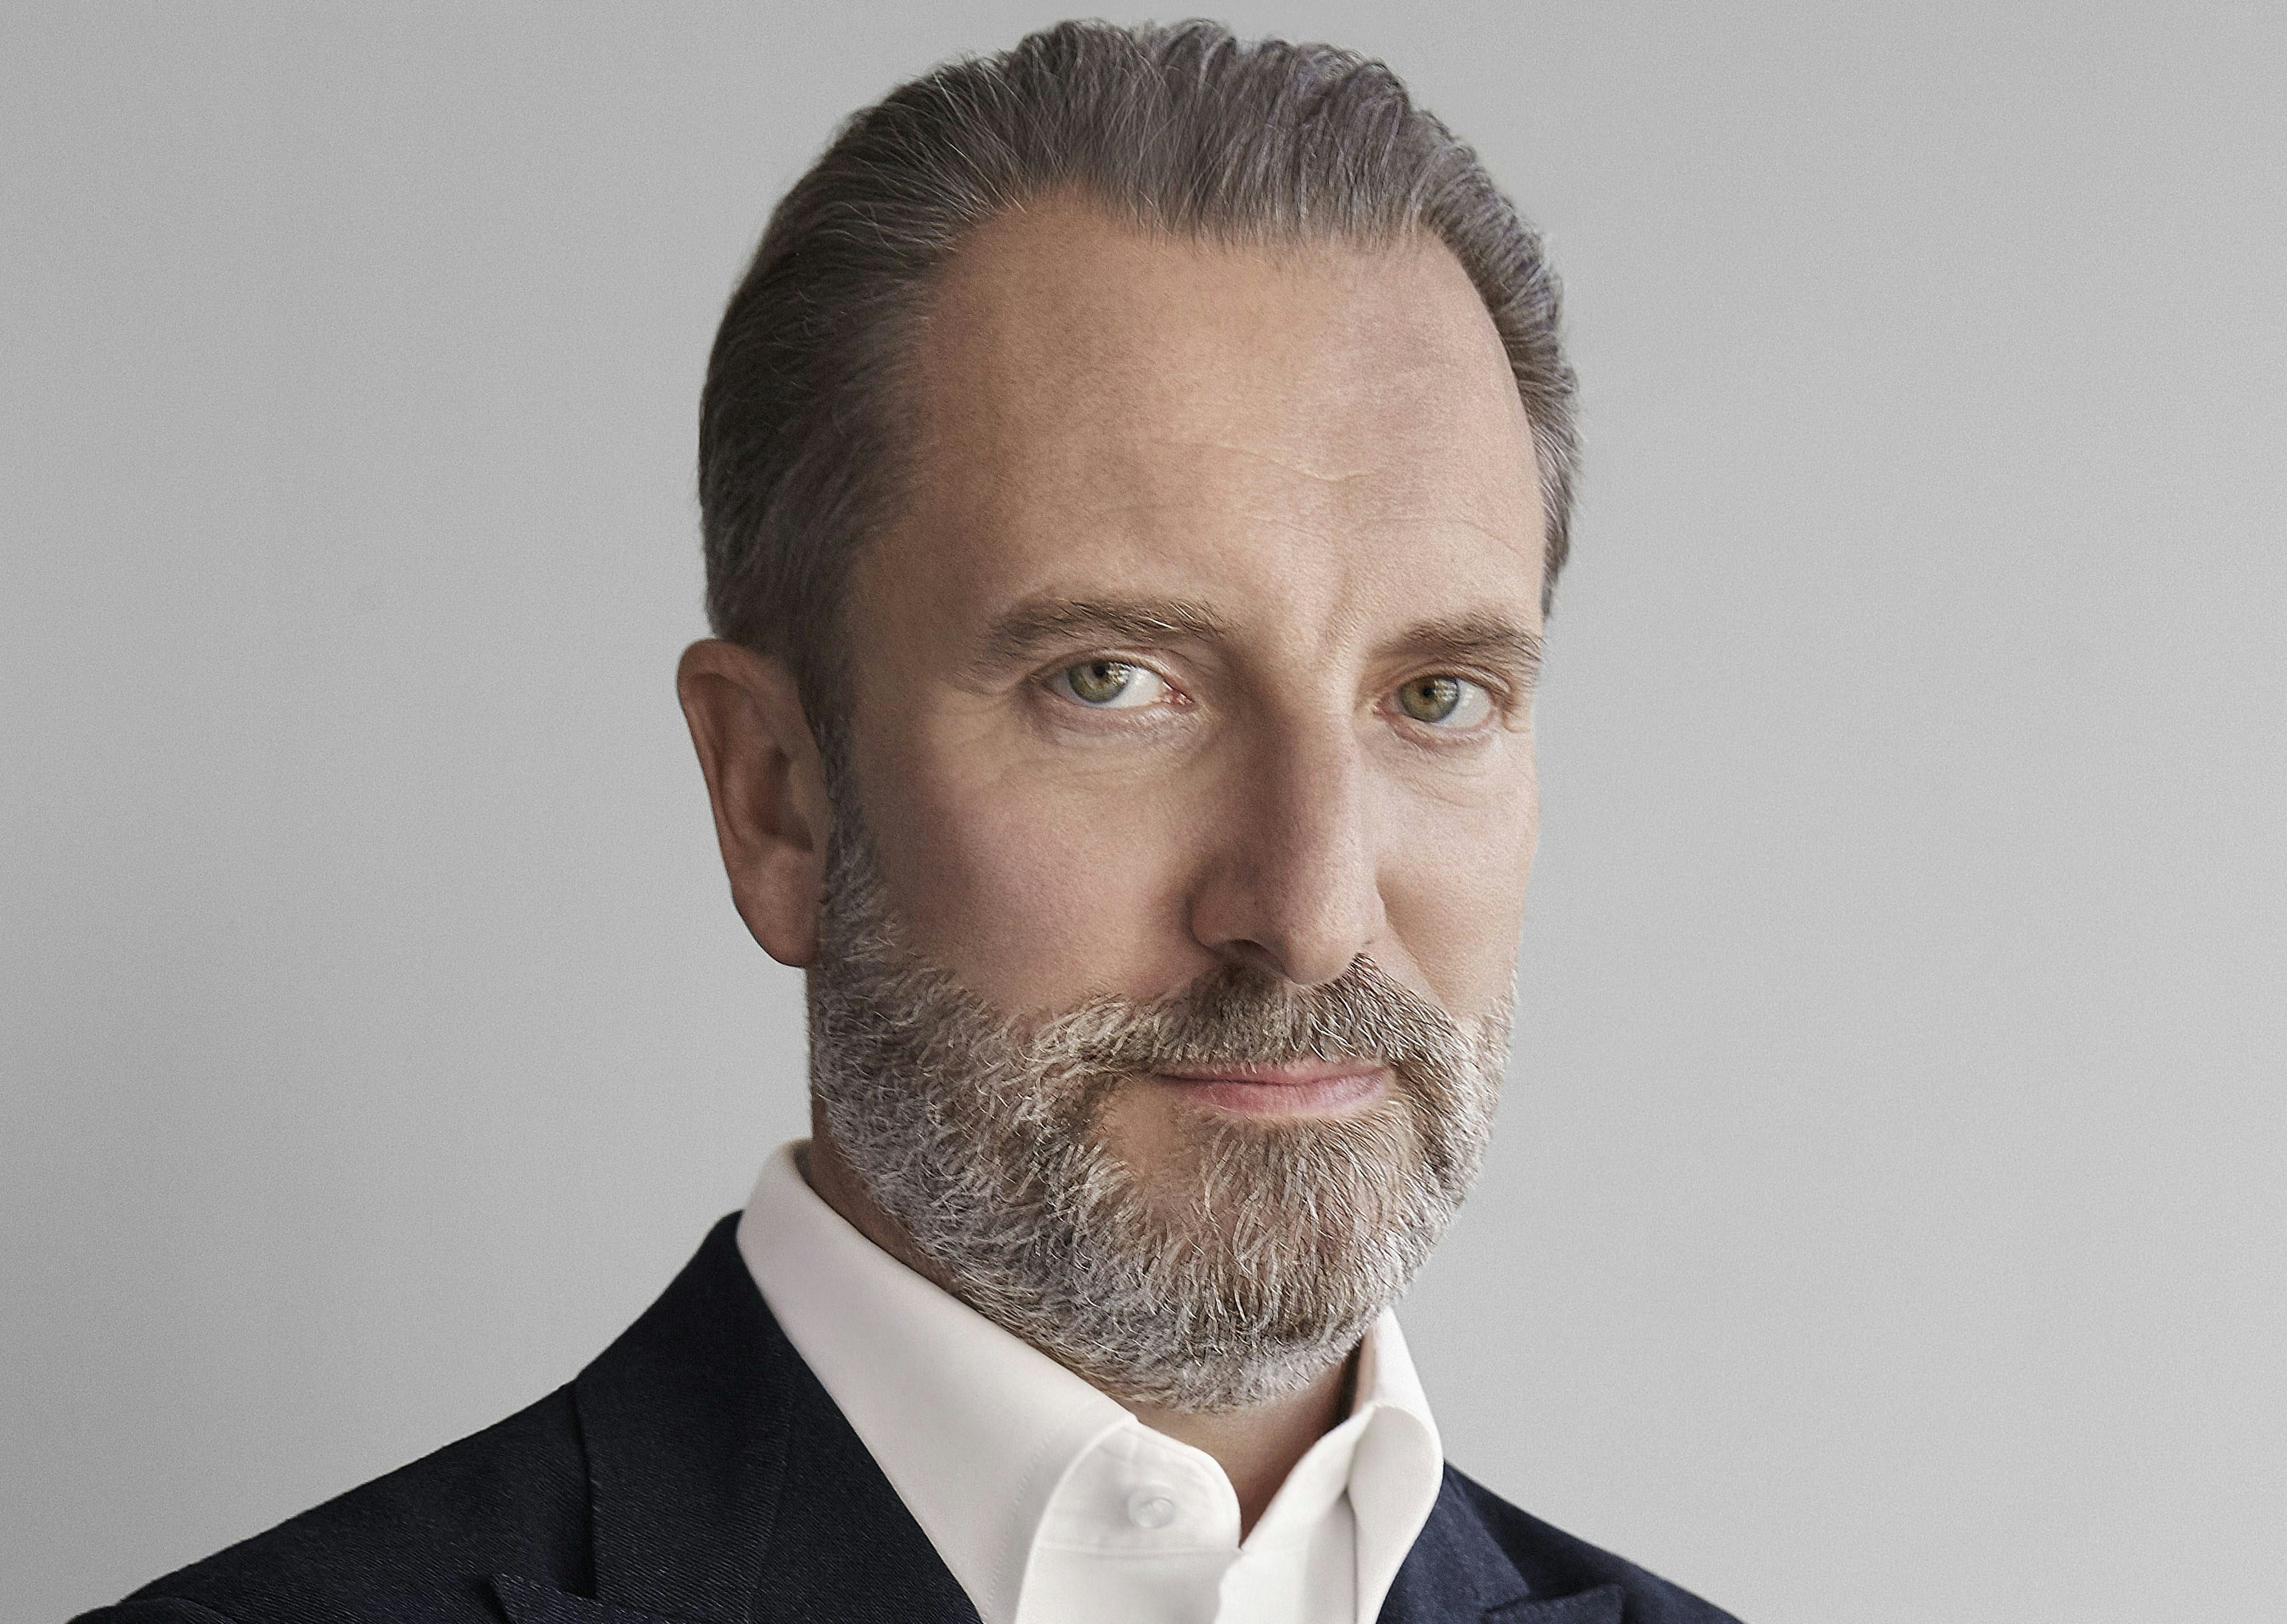 Jing Daily chatted with Tiffany & Co.’s CEO Alessandro Bogliolo on their upcoming Shanghai exhibition, trade war, and the brand’s overall strategies in China. Photo: courtesy of Tiffany & Co.